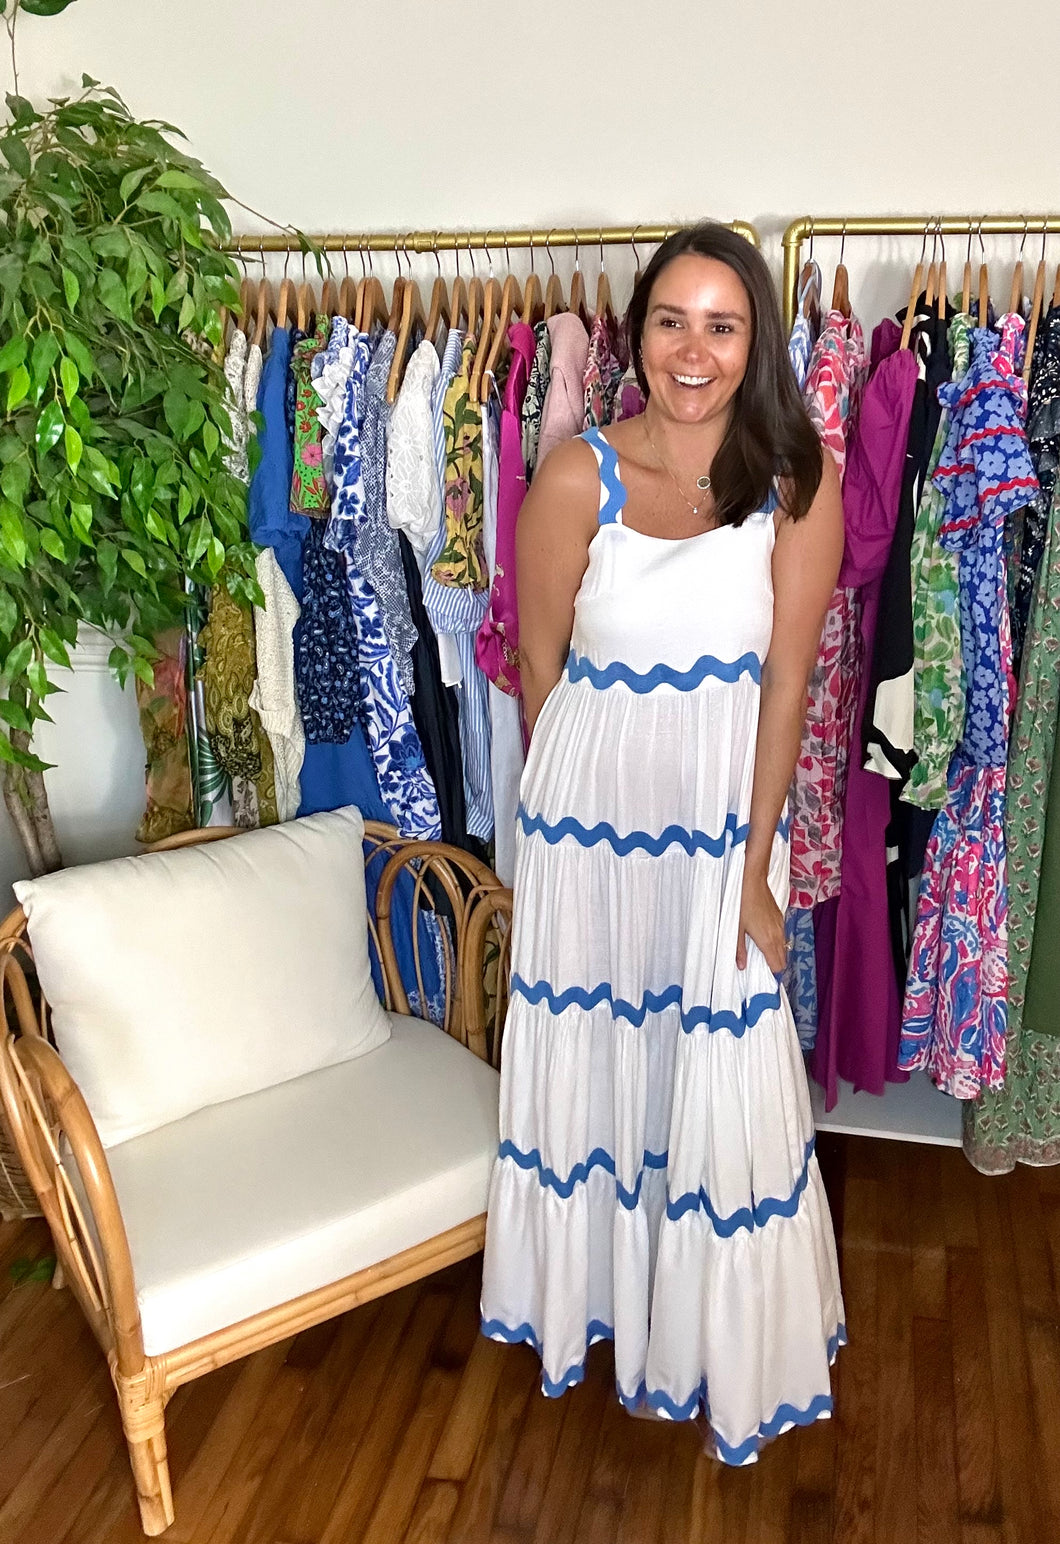 White cotton tiered maxi dress with blue rick rack detailing on straps and tiered skirt. Side zipper closure. Slip suggested.  True to size, wearing size small.  Good for bump, post bump or no bump!